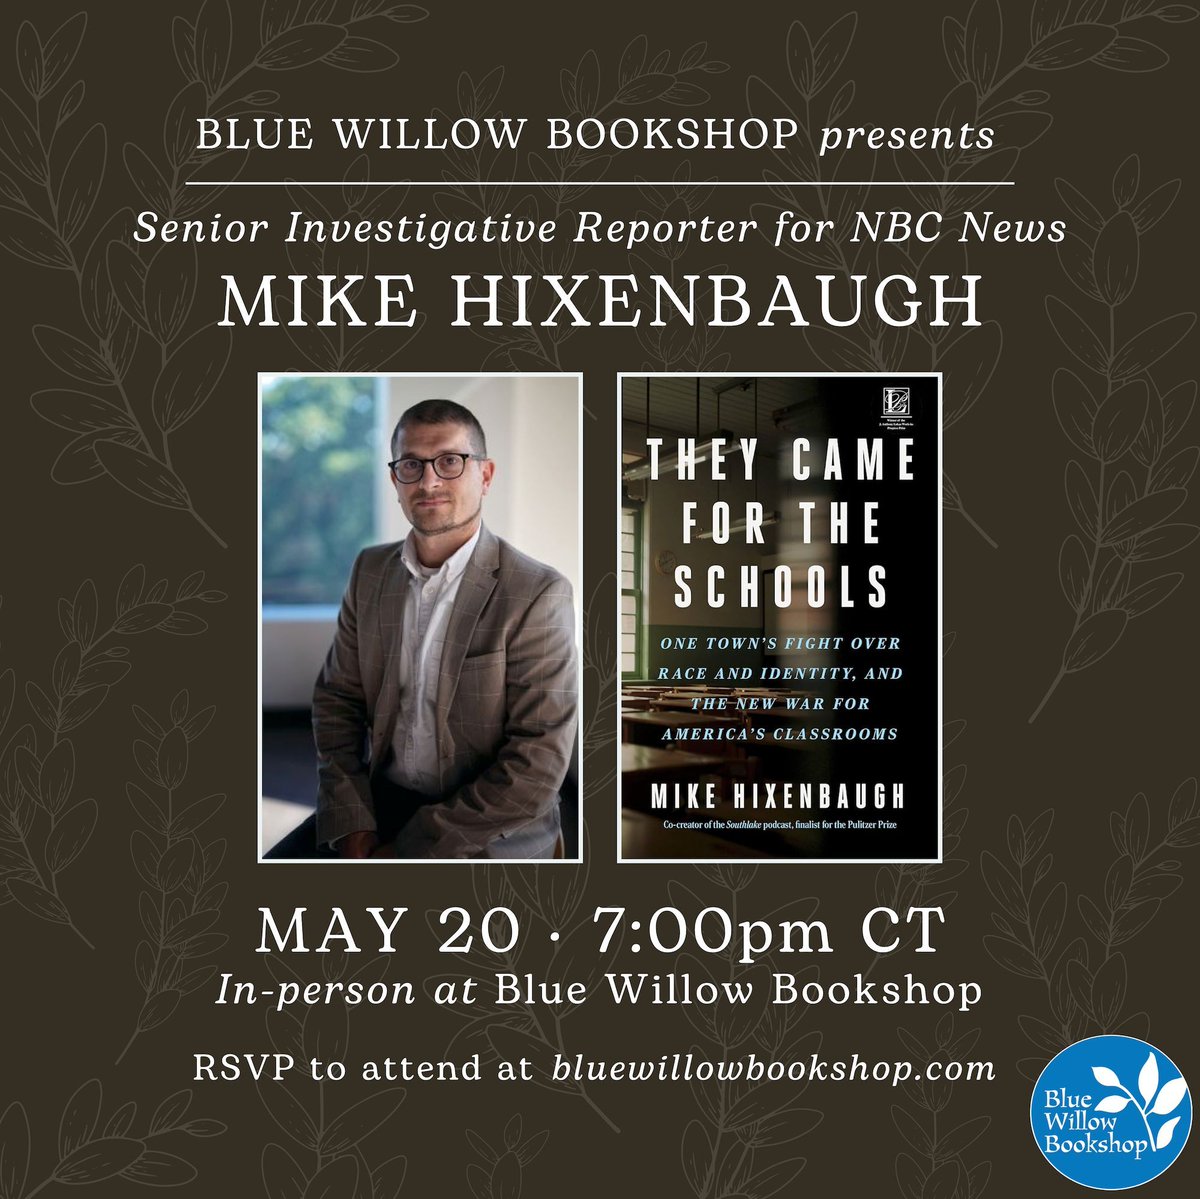 We can't wait to welcome senior investigative reporter @Mike_Hixenbaugh to the bookshop! He will discuss his book, THEY CAME FOR THE SCHOOLS: One Town's Fight Over Race and Identity, and the New War for America's Classrooms. Details: bluewillowbookshop.com/event/hixenbau… @MarinerBooks